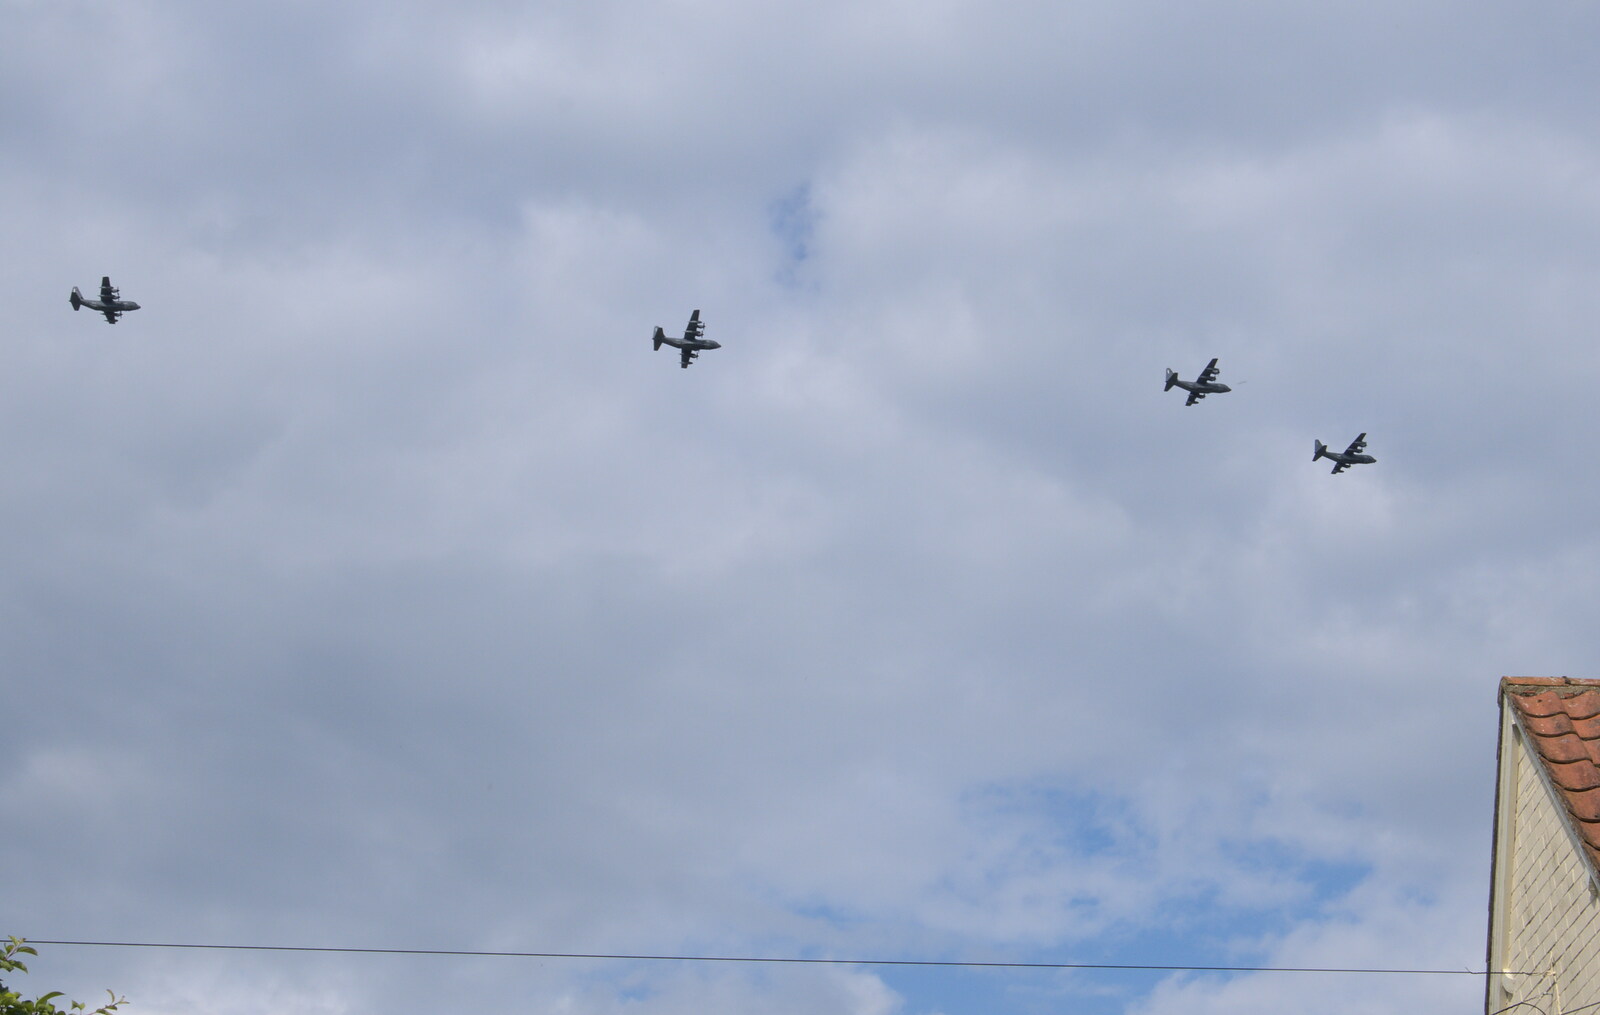 The Suffolk Show, Trinity Park, Ipswich - 1st June 2022: Four C-130 Hercules aircraft pass over the house